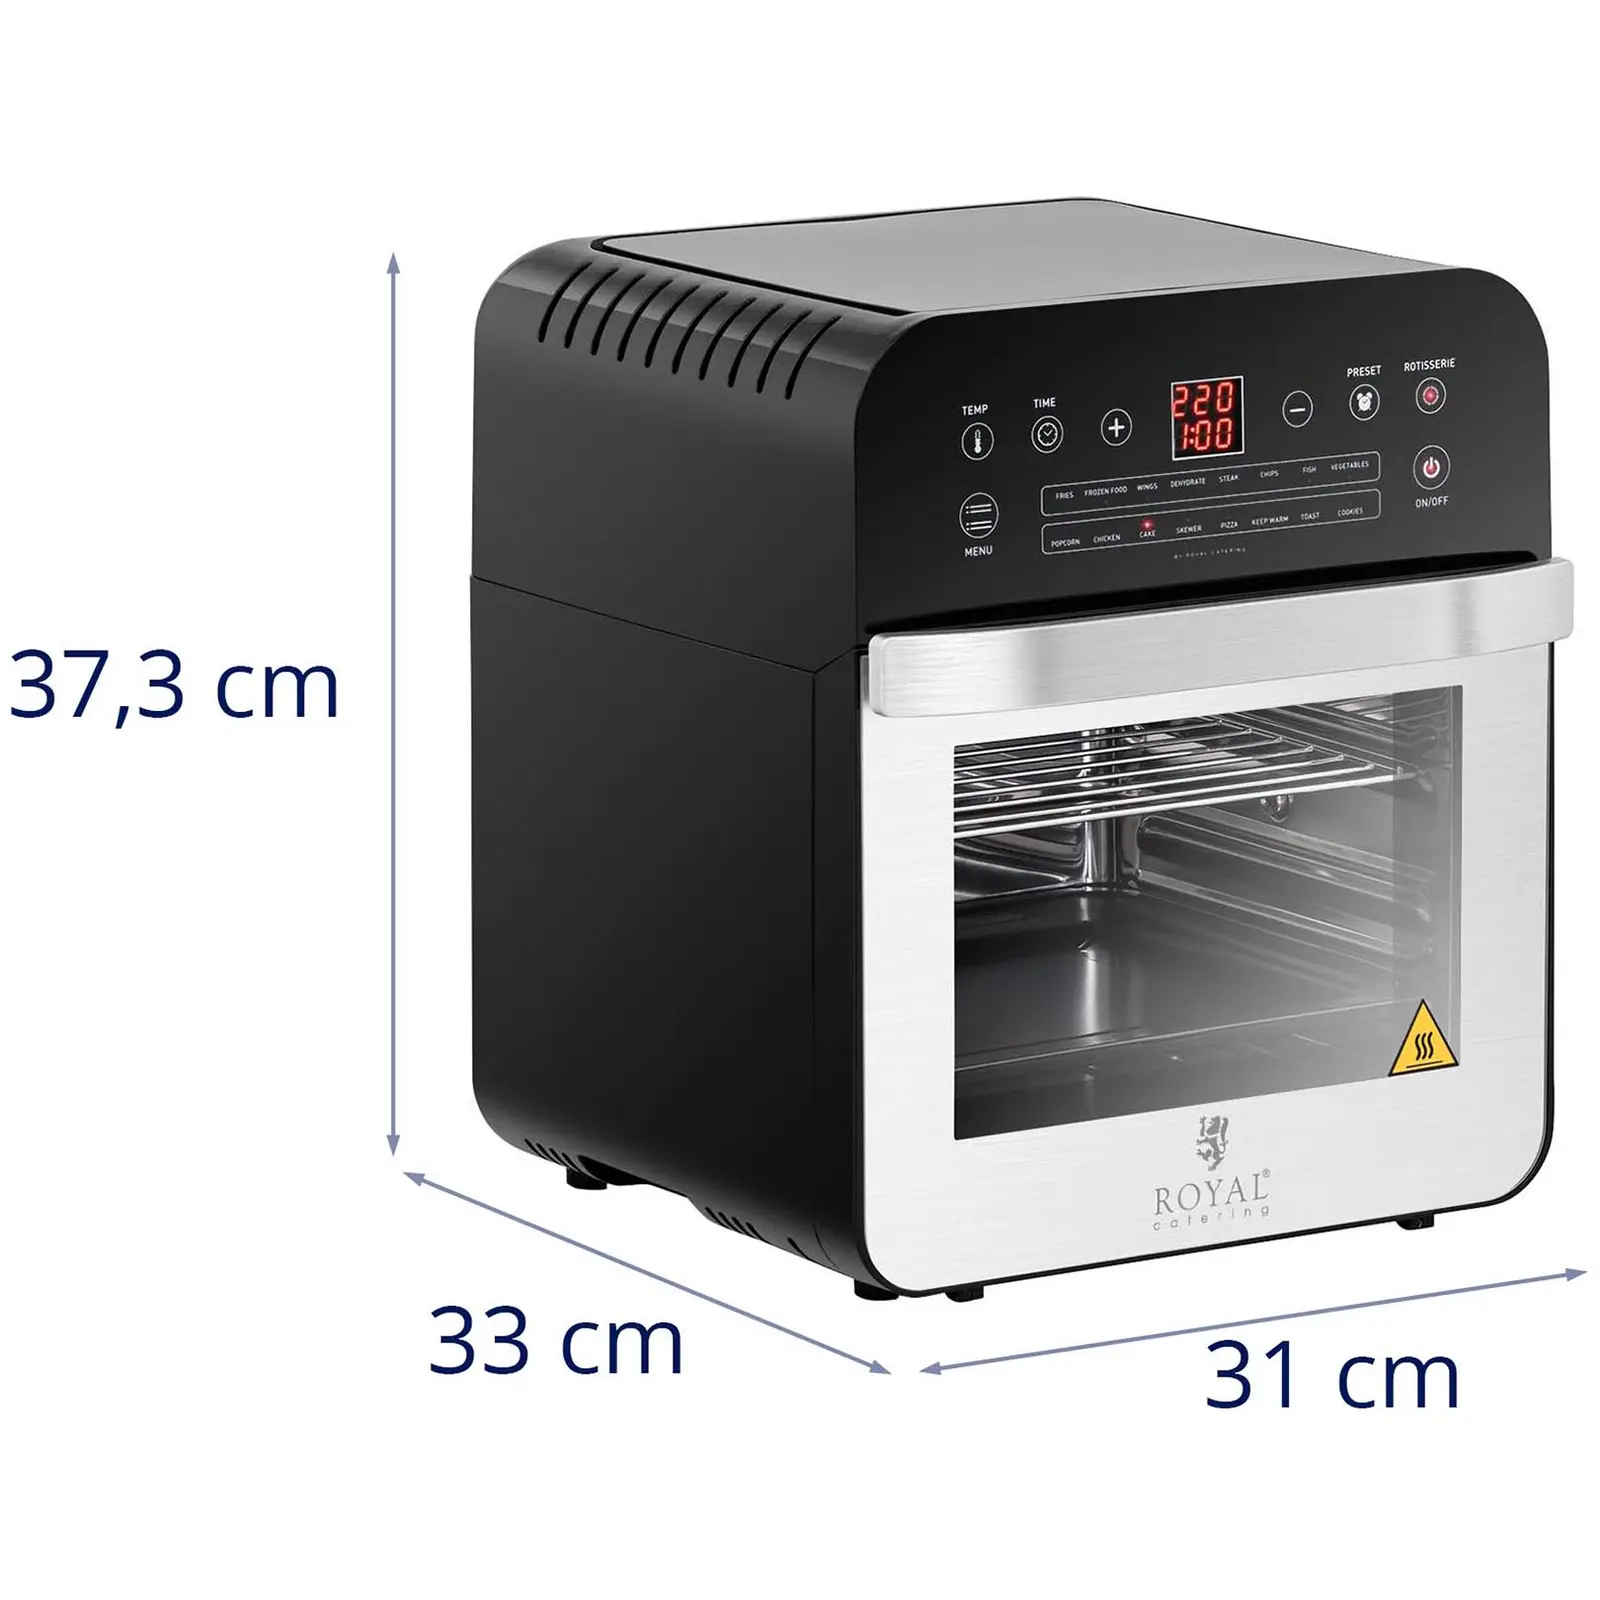 Countertop Convection Oven - 1,600 W - 13 programmes - incl. oven rack, baking sheet, rotisserie and drip tray